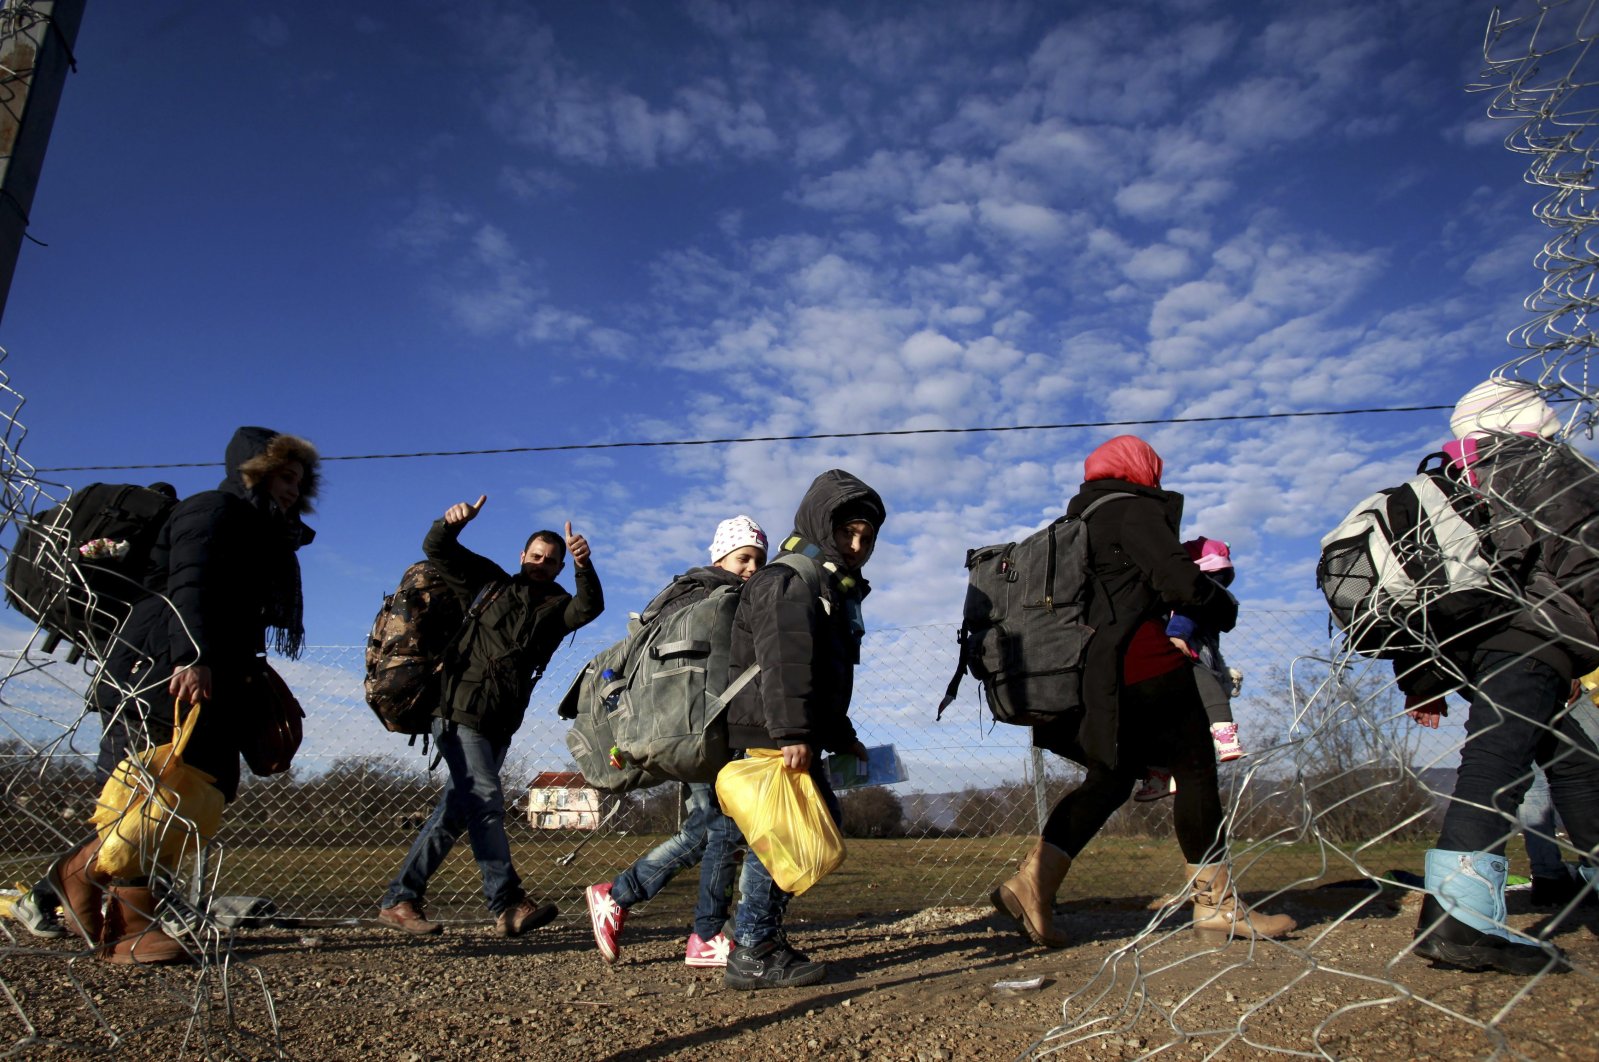 most asylum seekers travel to